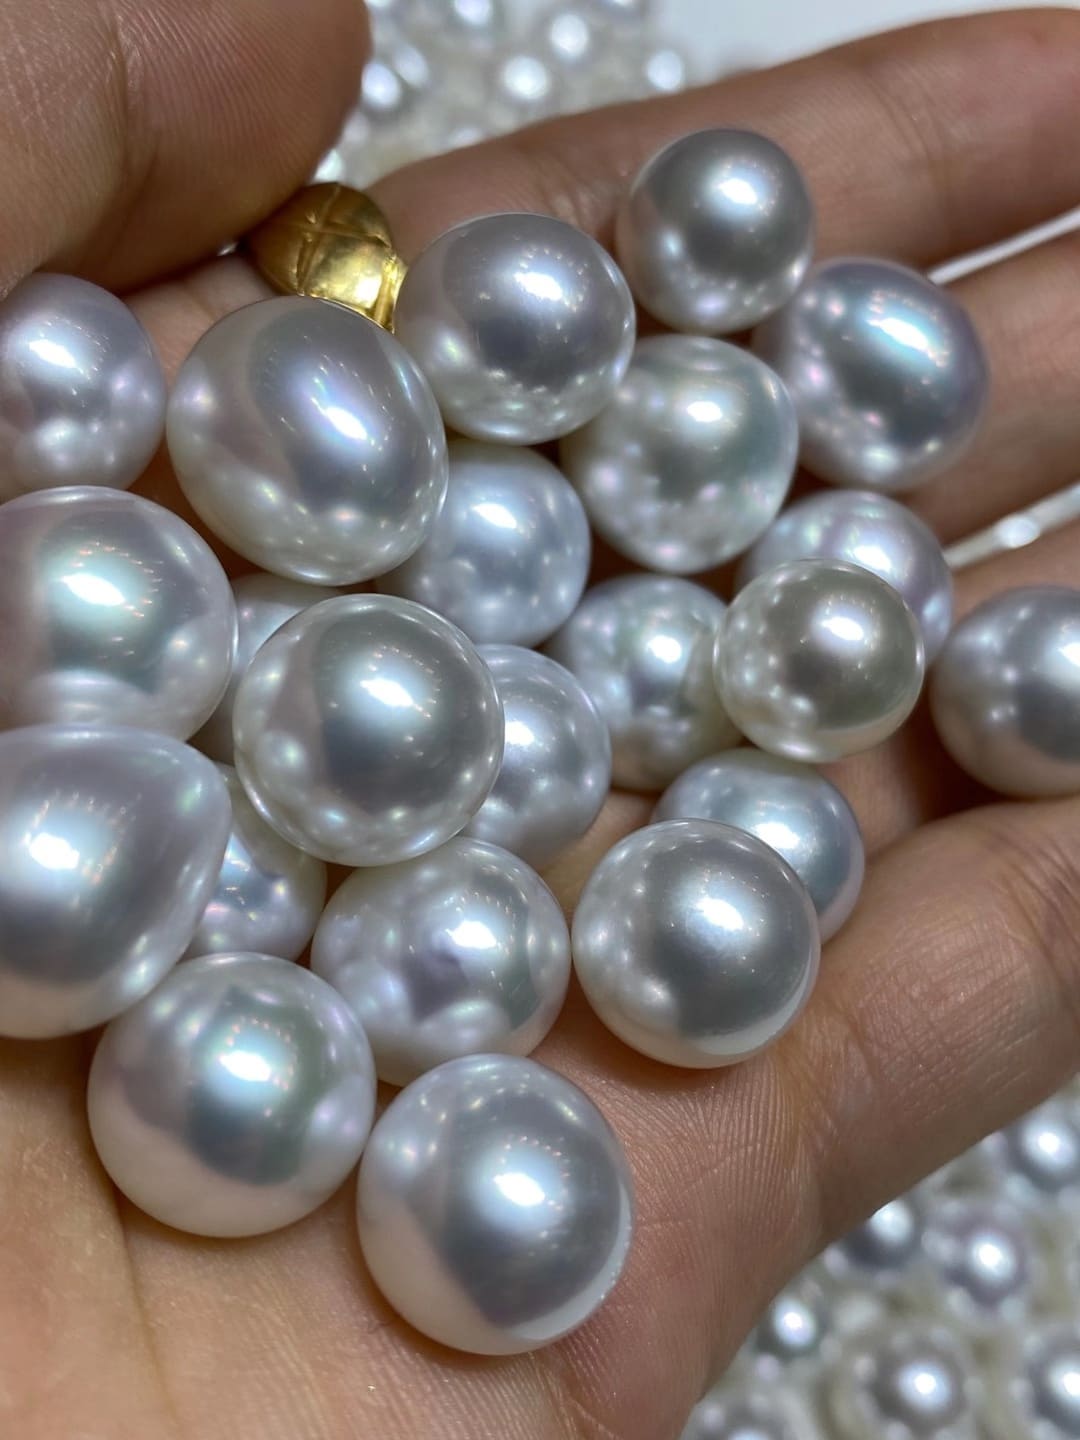 Myseapearl Presents Quality Freshwater & Sea Pearl Jewelry With Contemporary Style And Classic Appearance To Global Clients